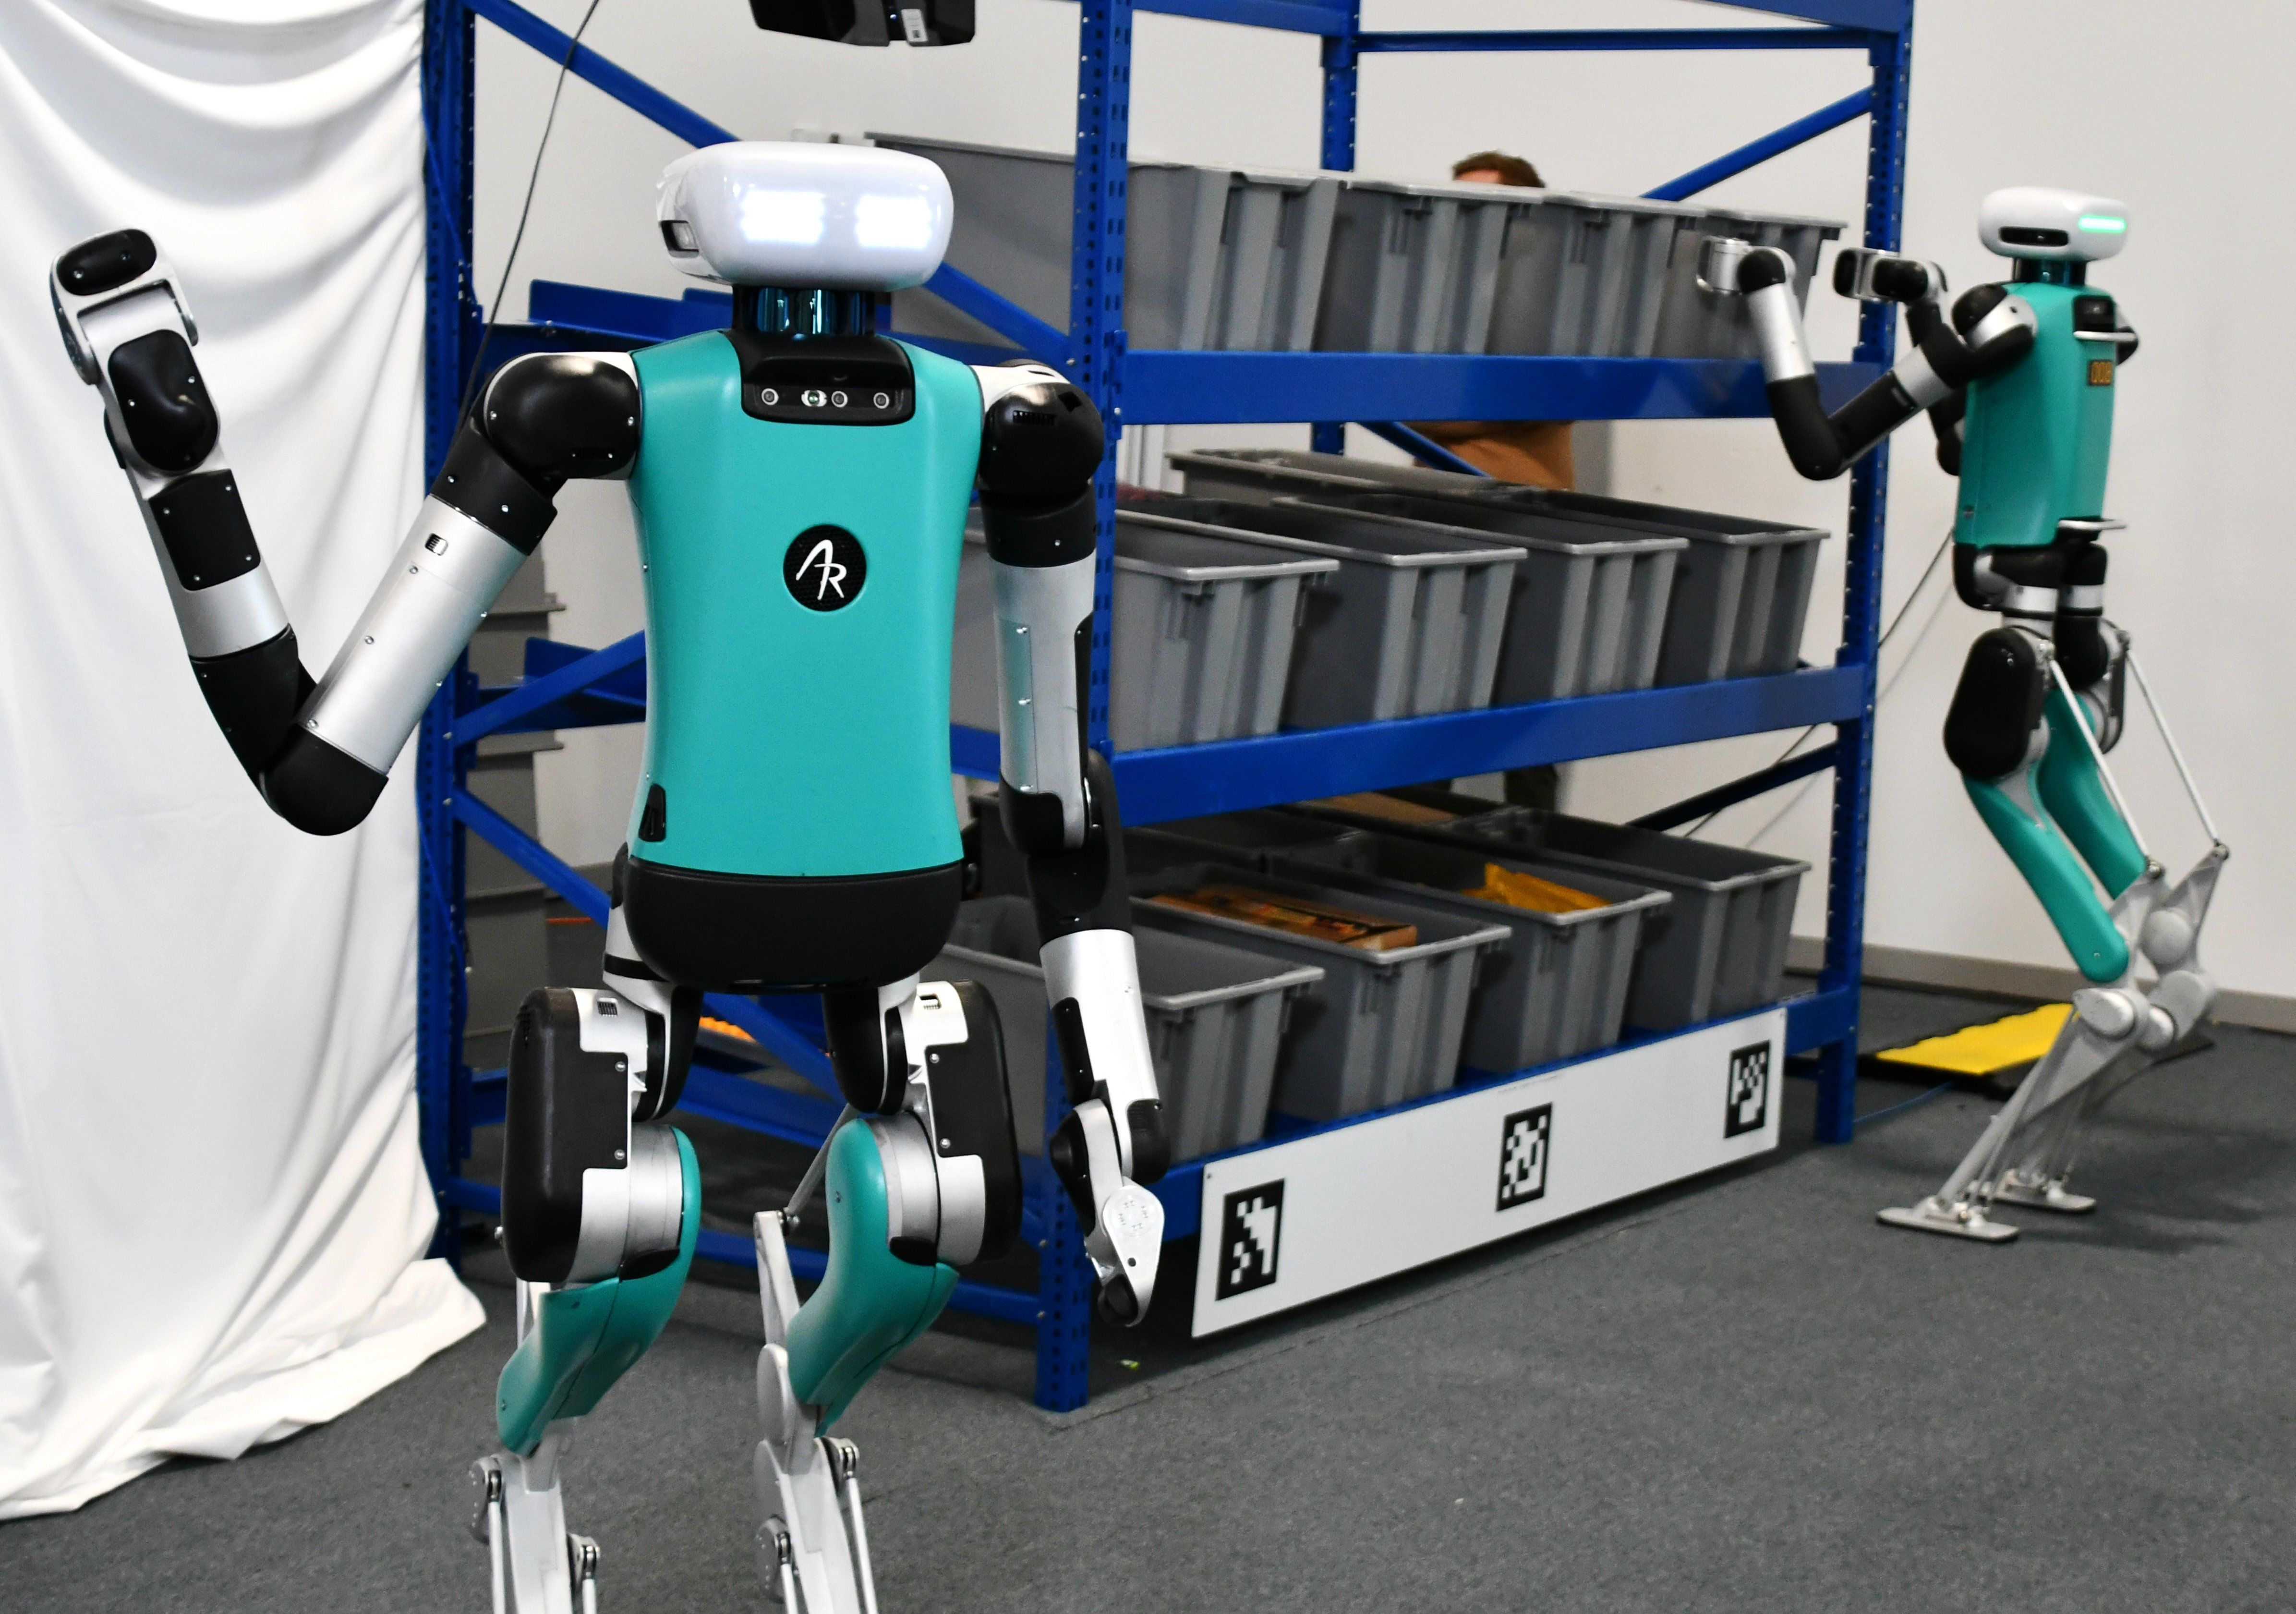 In the foreground, a teal, black, and silver bipedal humanoid robot waves its right arm. In the background, a similar robot reaches to take a bin off of a shelf.